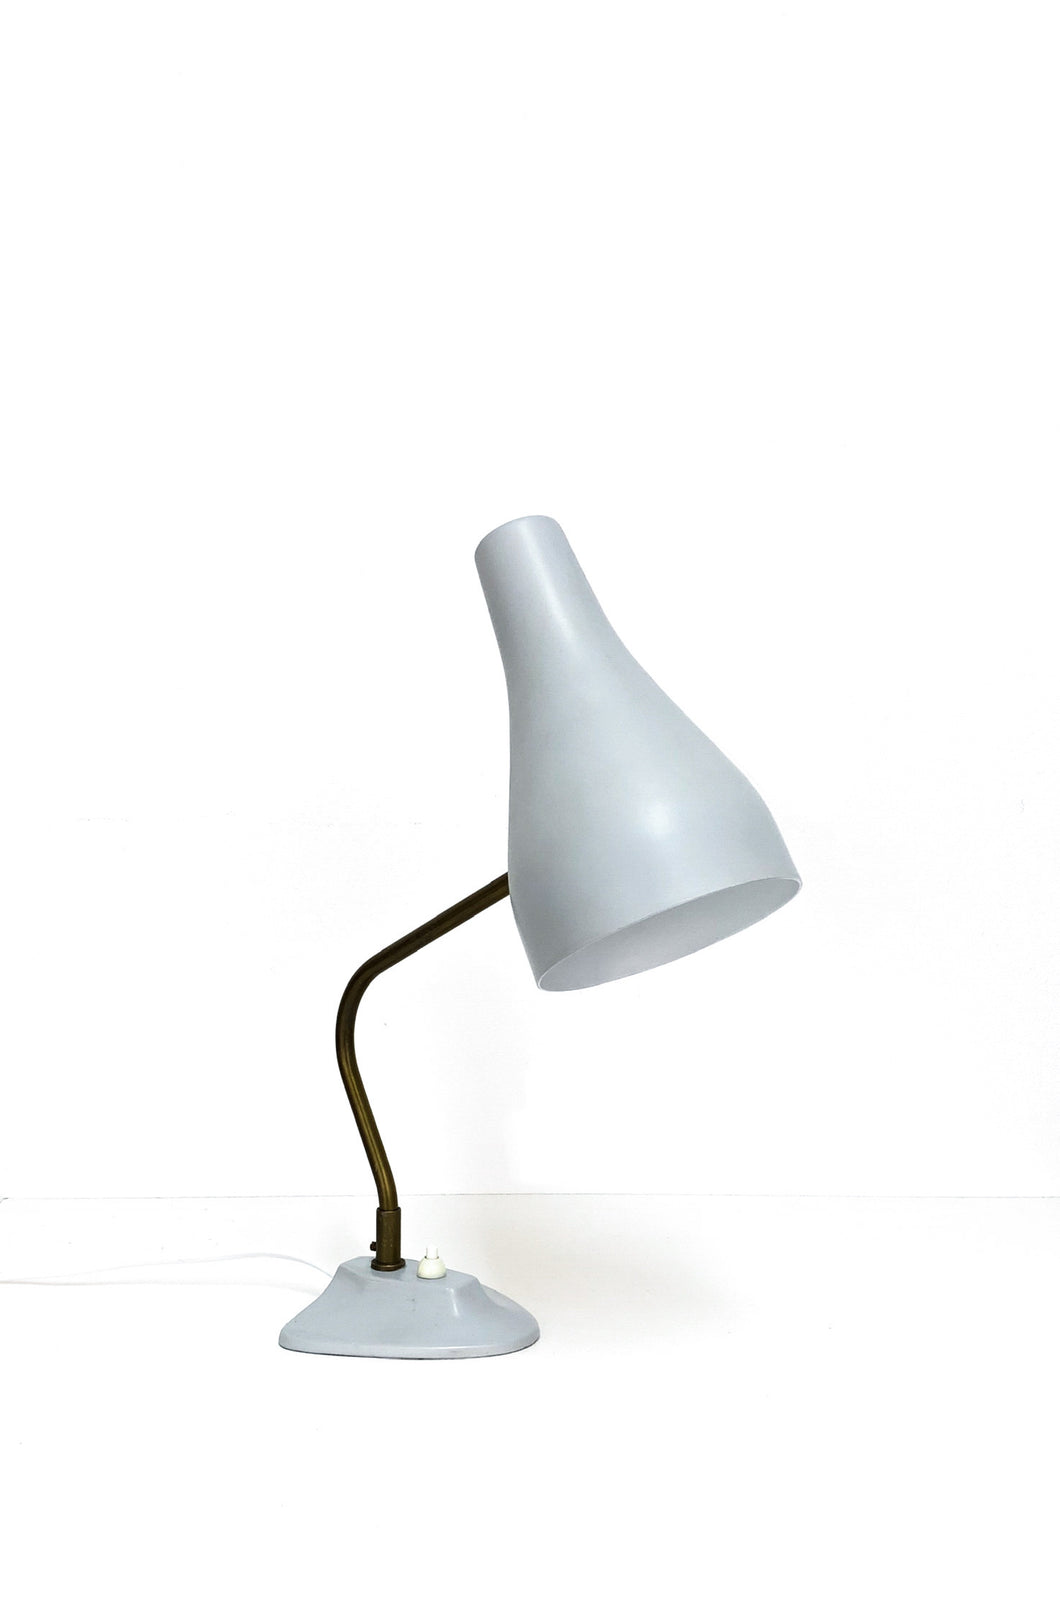 TABLE LAMP BY ASEA